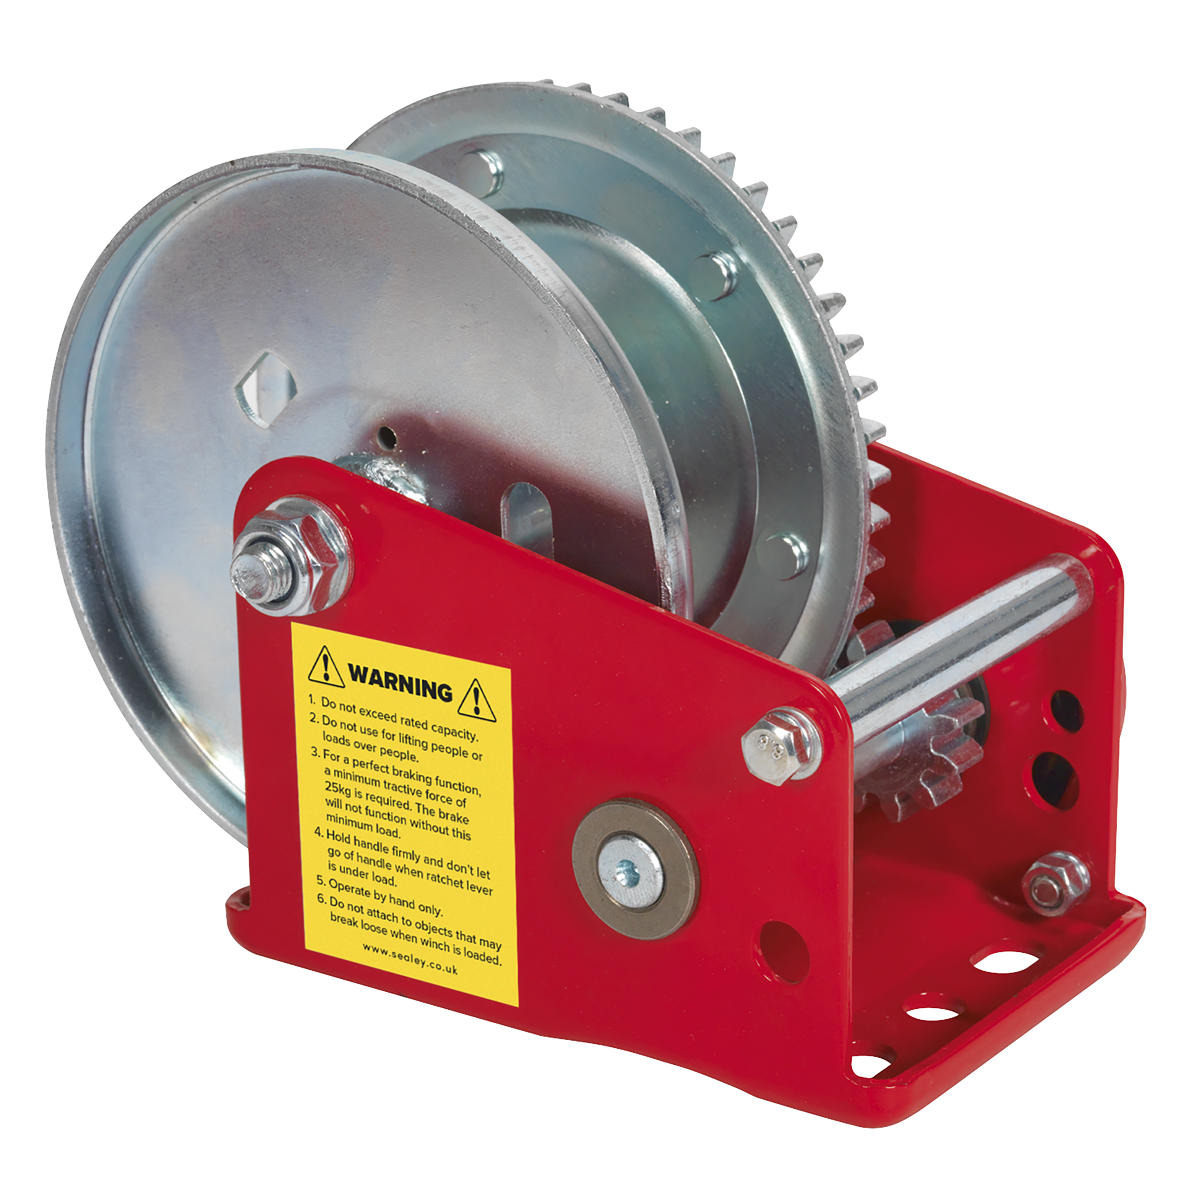 Geared Hand Winch with Brake 540kg Capacity